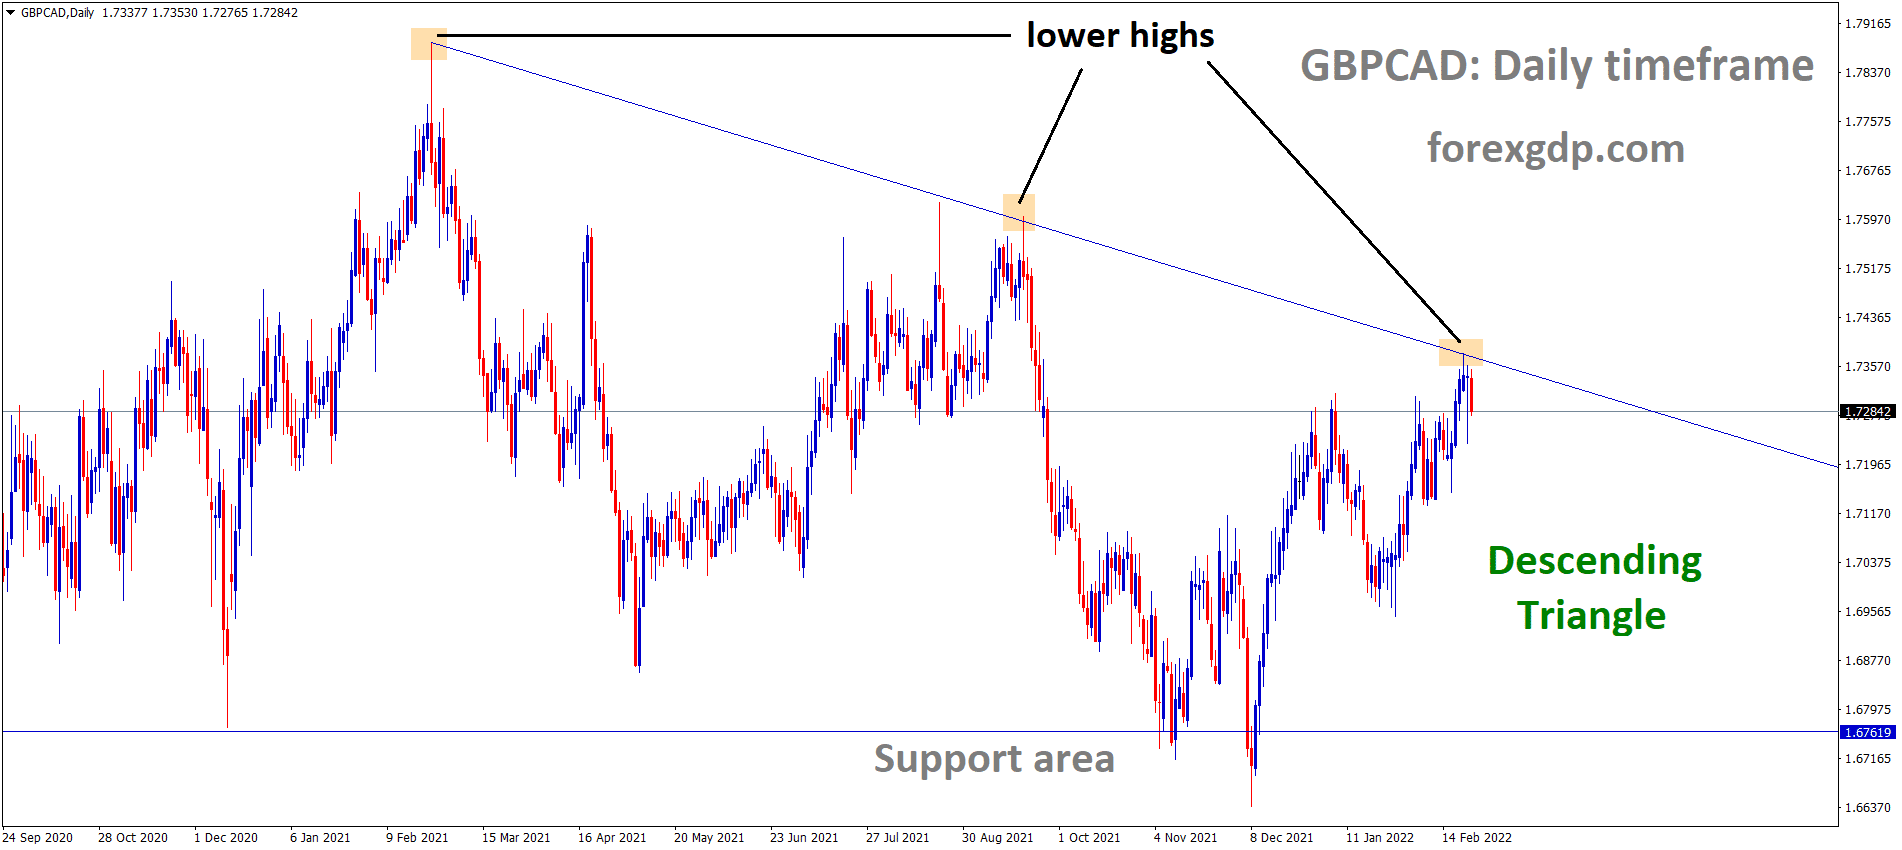 GBPCAD is moving in a descending triangle pattern and the market has fallen from the lower high area of the pattern.